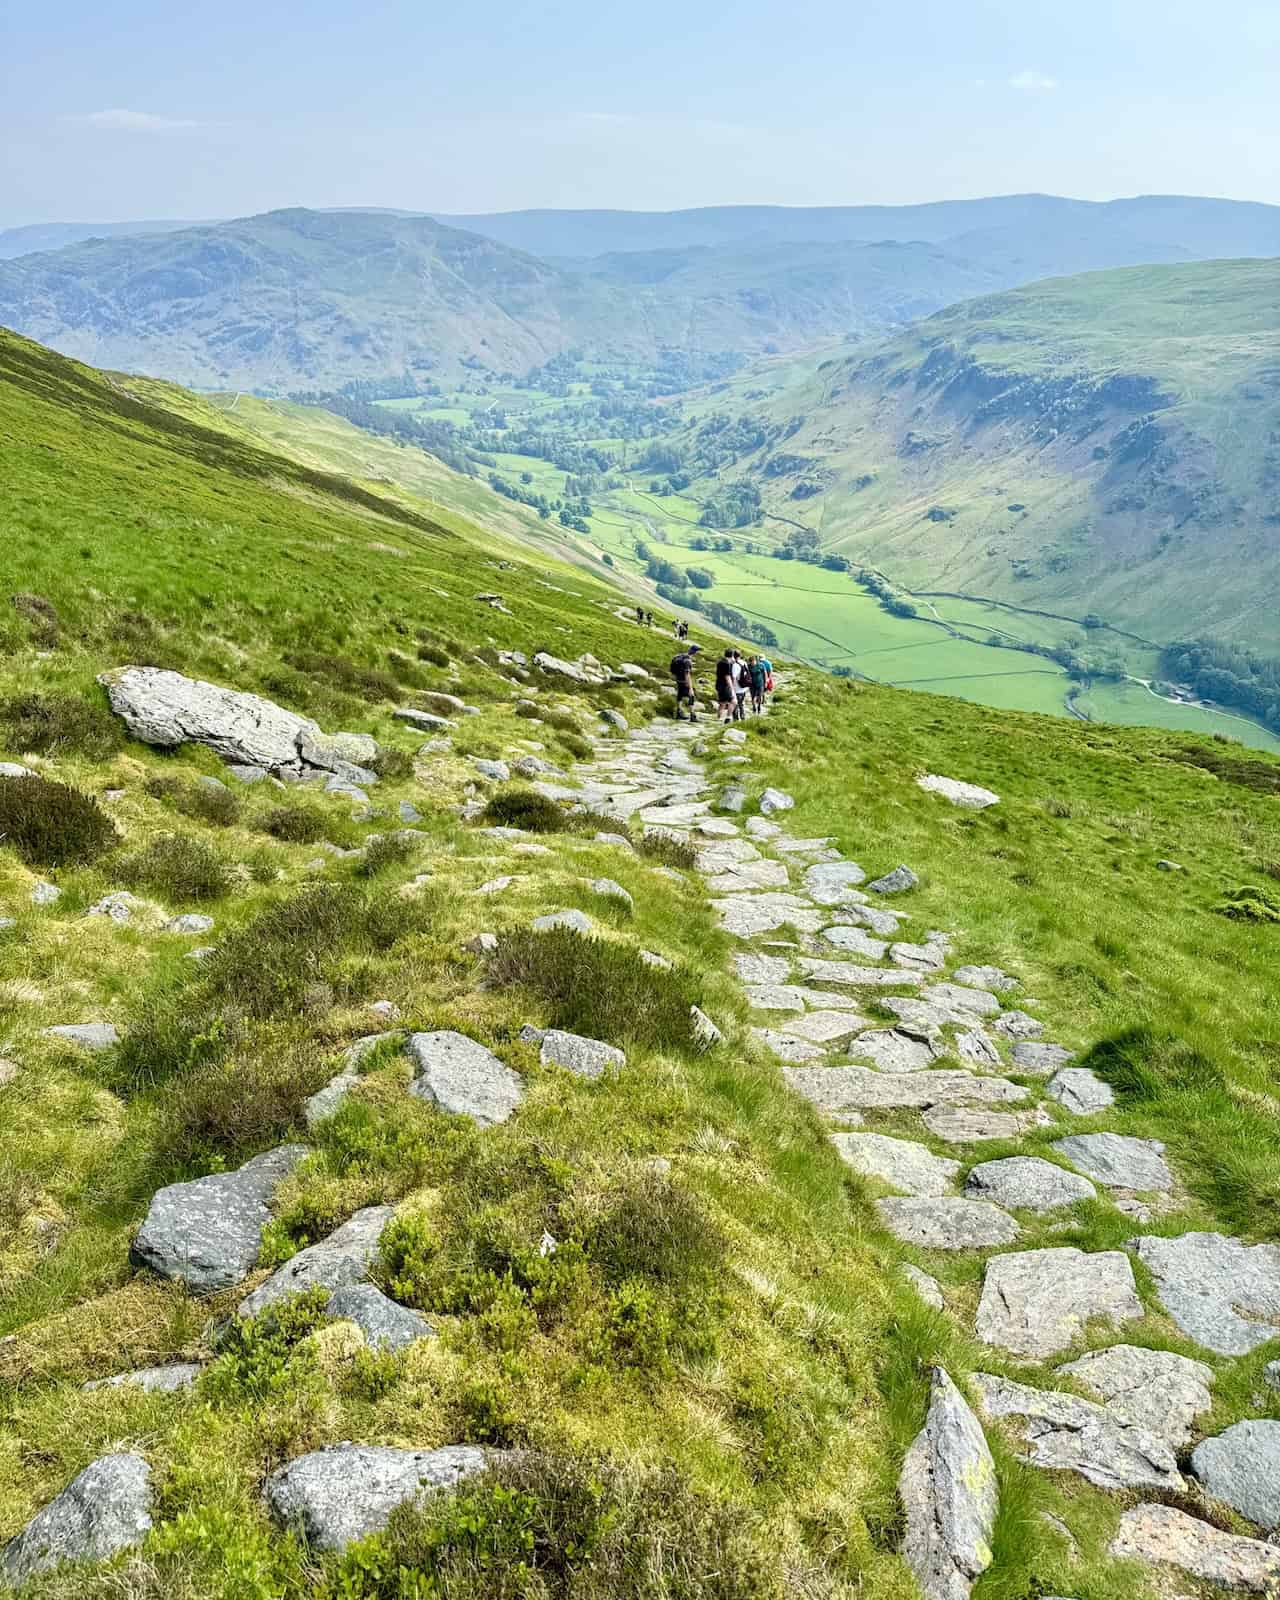 Looking back down into the Grisedale valley, we notice Birks on the right and Place Fell beyond Patterdale. The well-maintained path makes the ascent more manageable.